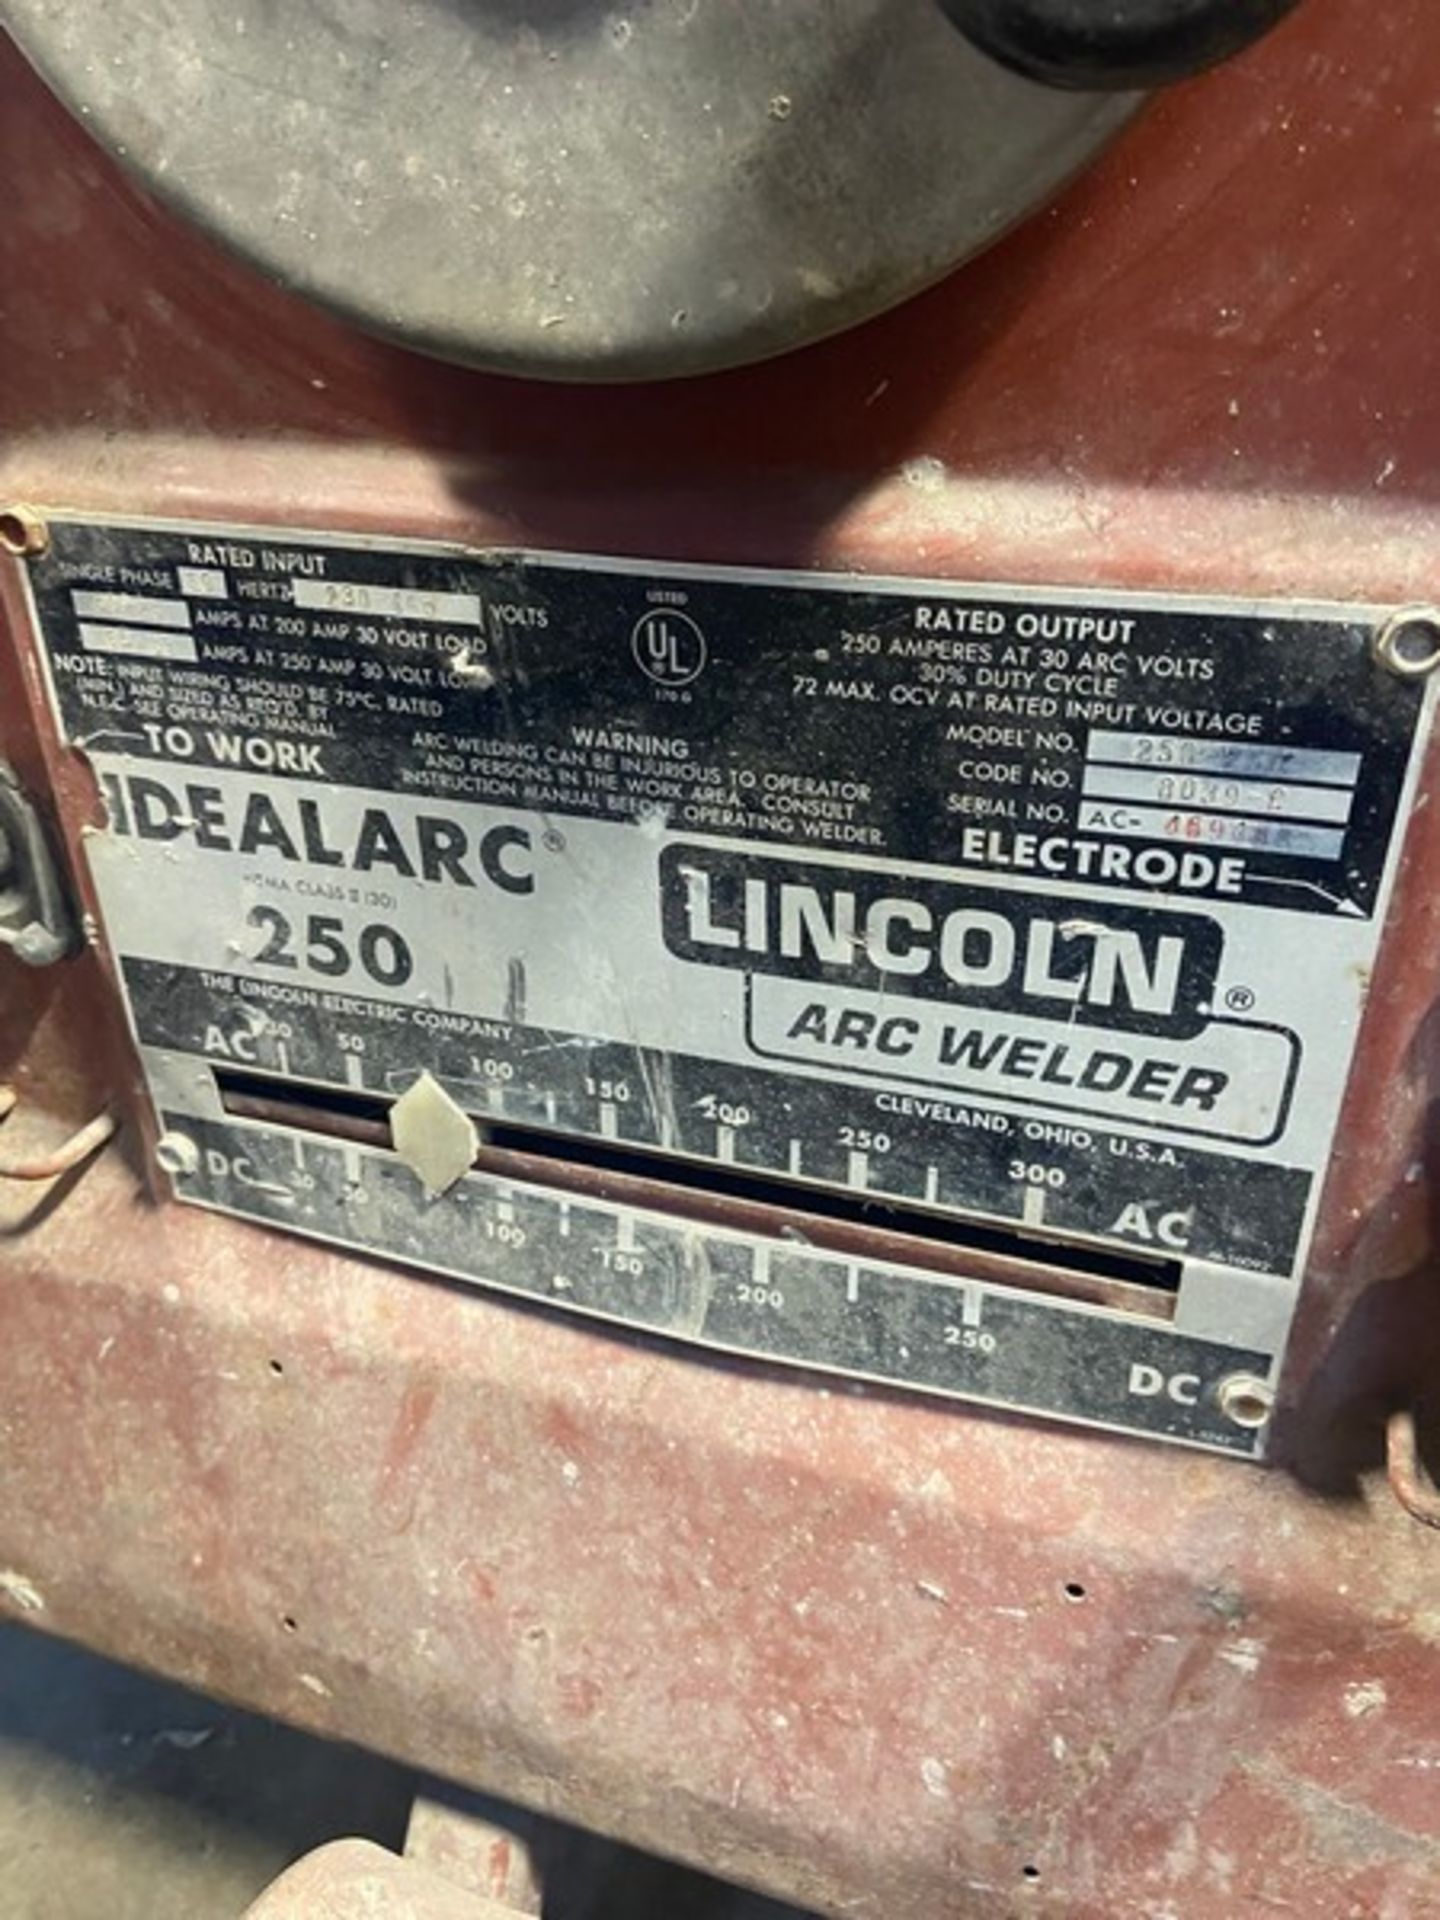 Lincoln Arc Welder, M/N IDEALARC 250, S/N AC-46948, Mounted on Wheels (LOCATED IN MONROEVILLE, PA)( - Image 4 of 8